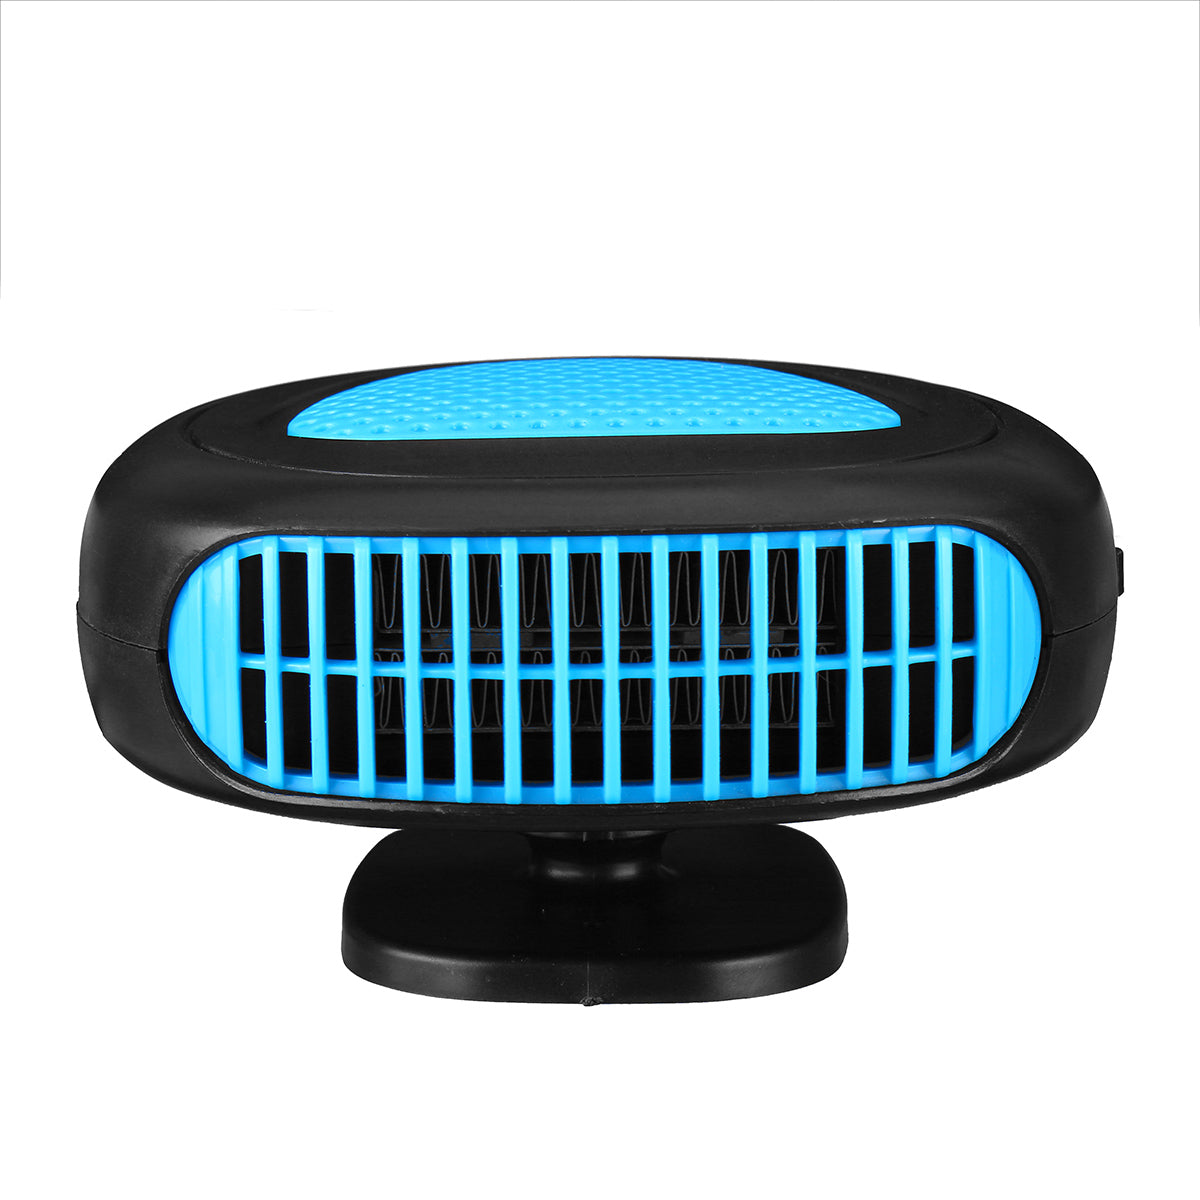 Medium Turquoise 12V/24V Car Heater Air Purification Defrost Defog Fumigate Auto ElectricHeating Cooling